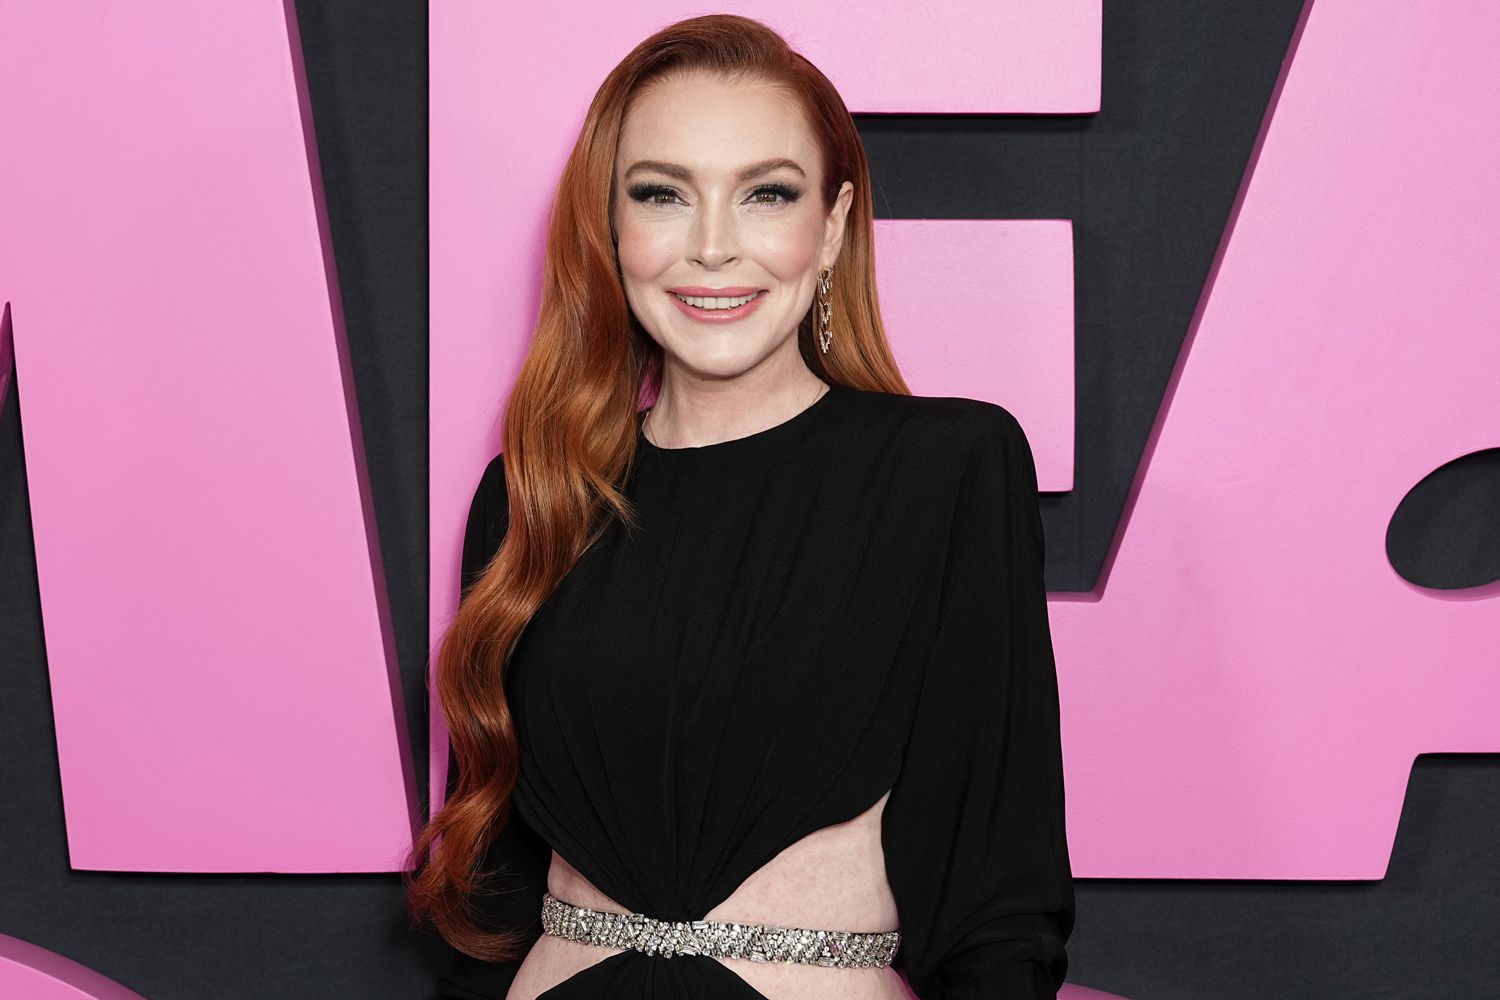 Lindsay Lohan’s Dad Criticizes New ‘Mean Girls’ Movie For ‘Fire Crotch’ Reference